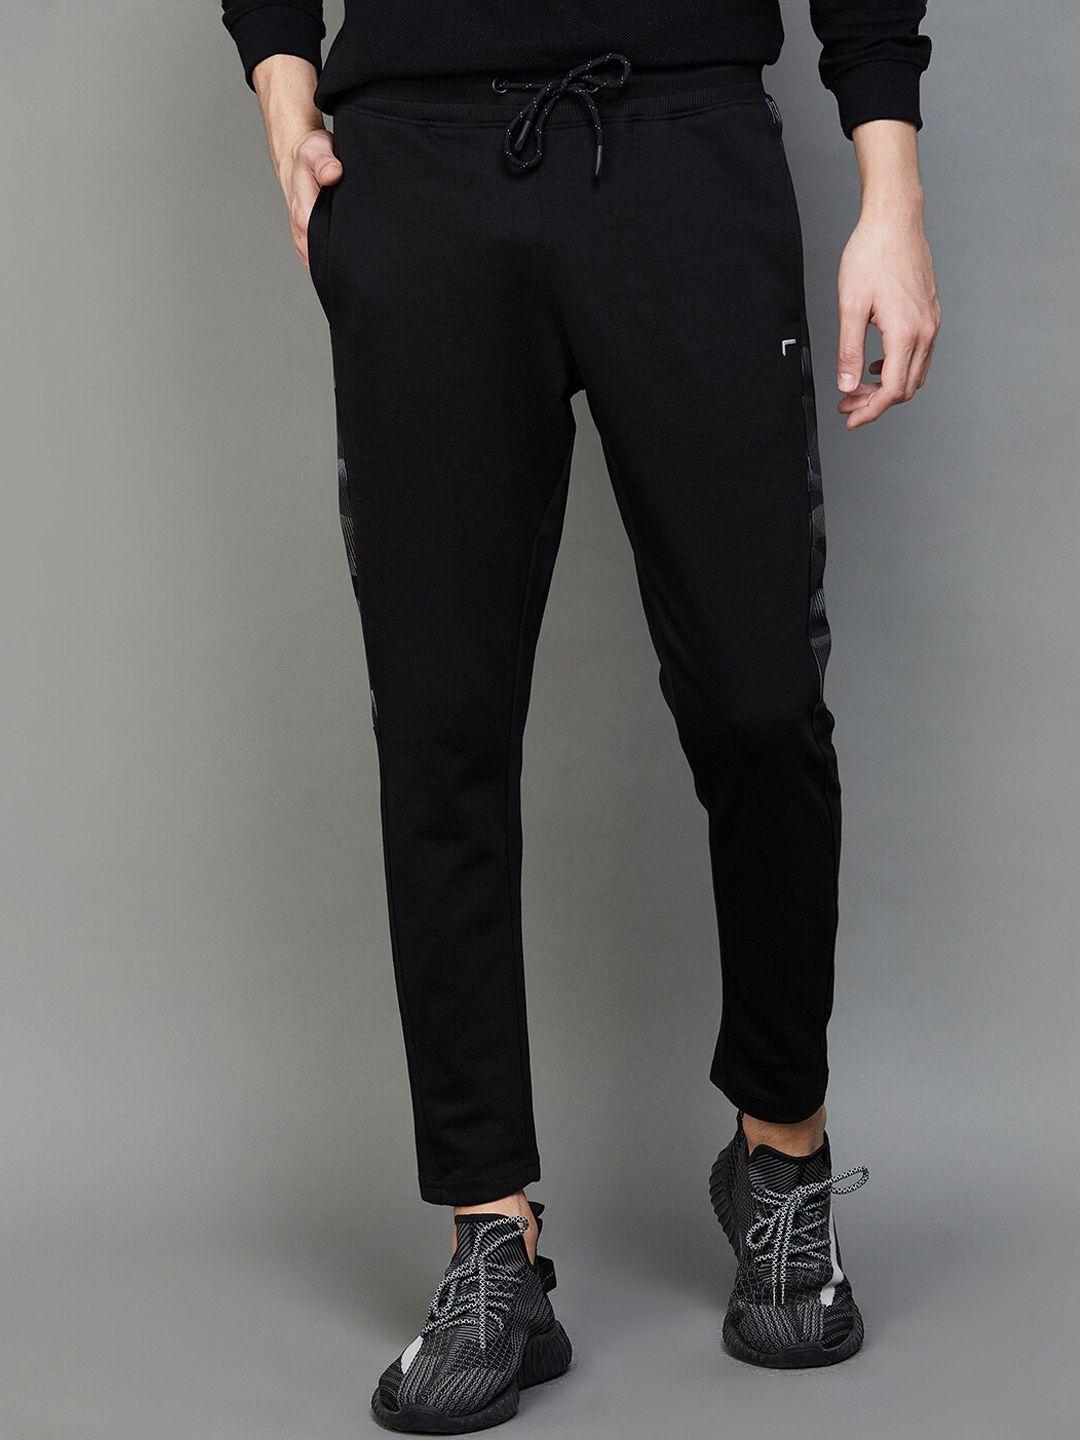 fame-forever-by-lifestyle-men-mid-rise-track-pants